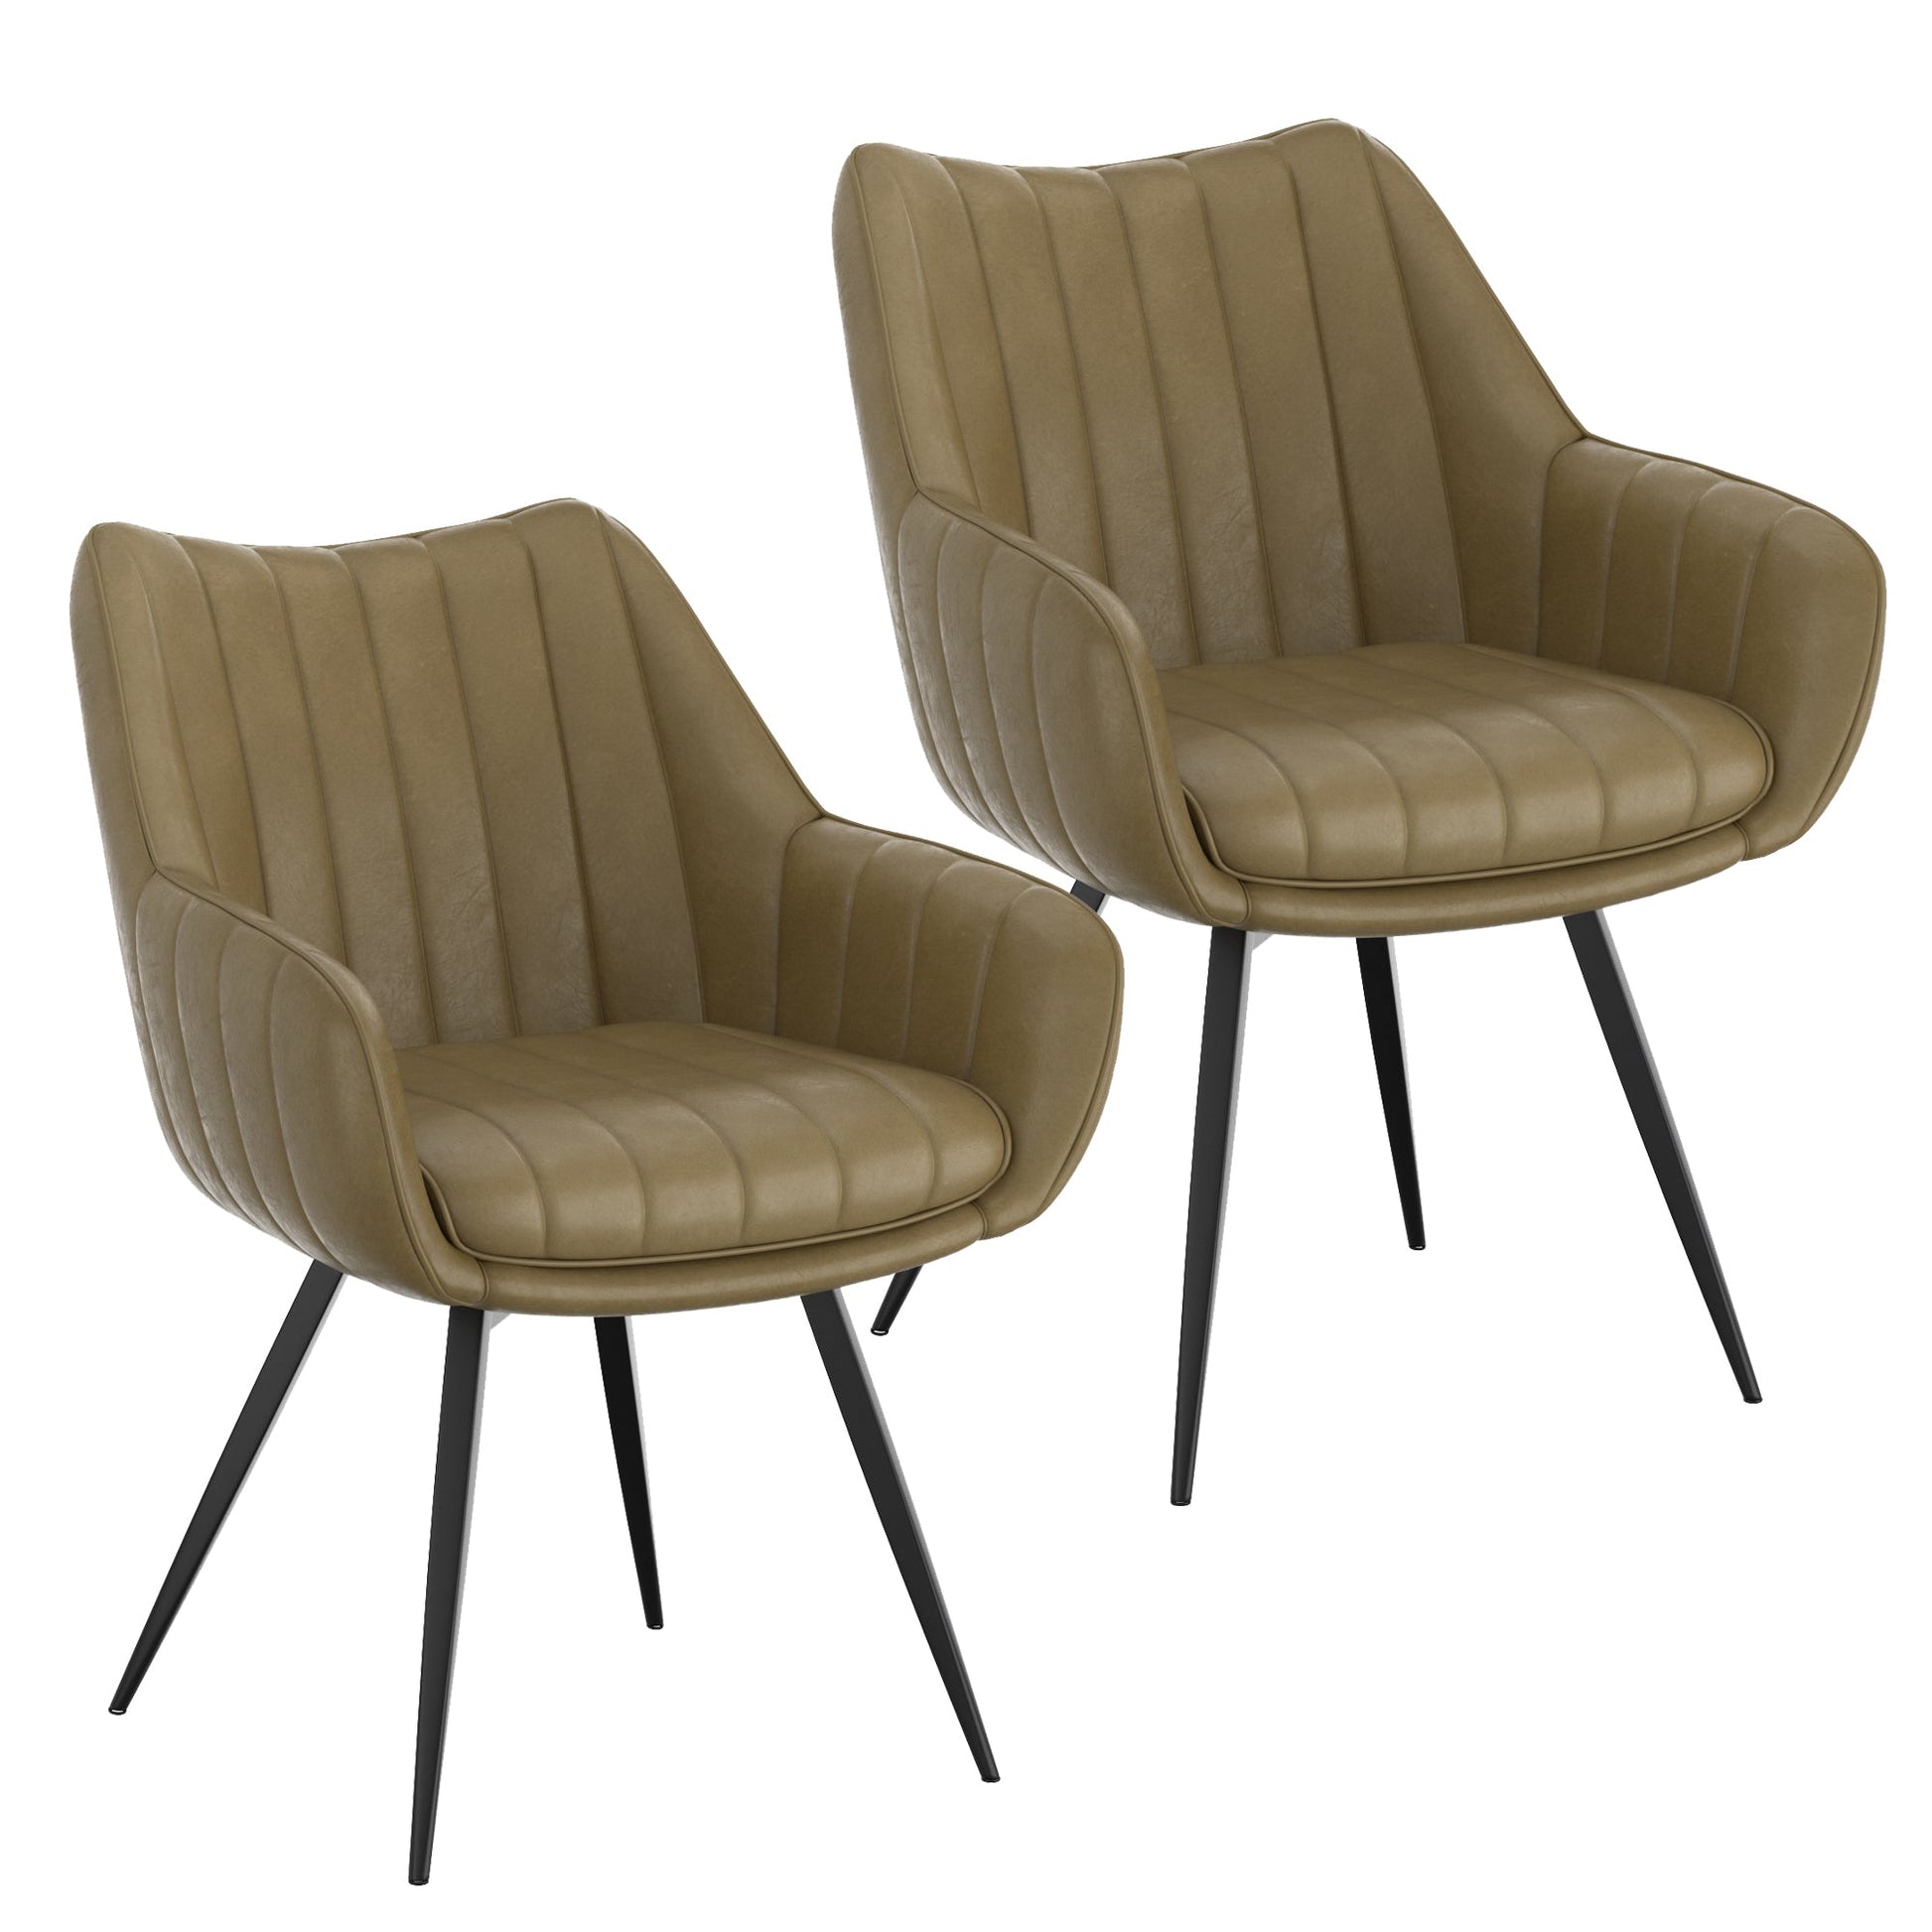 Swivel Dining Chairs | Set of 2 | Talon Green Leather - Your Bar Stools Canada